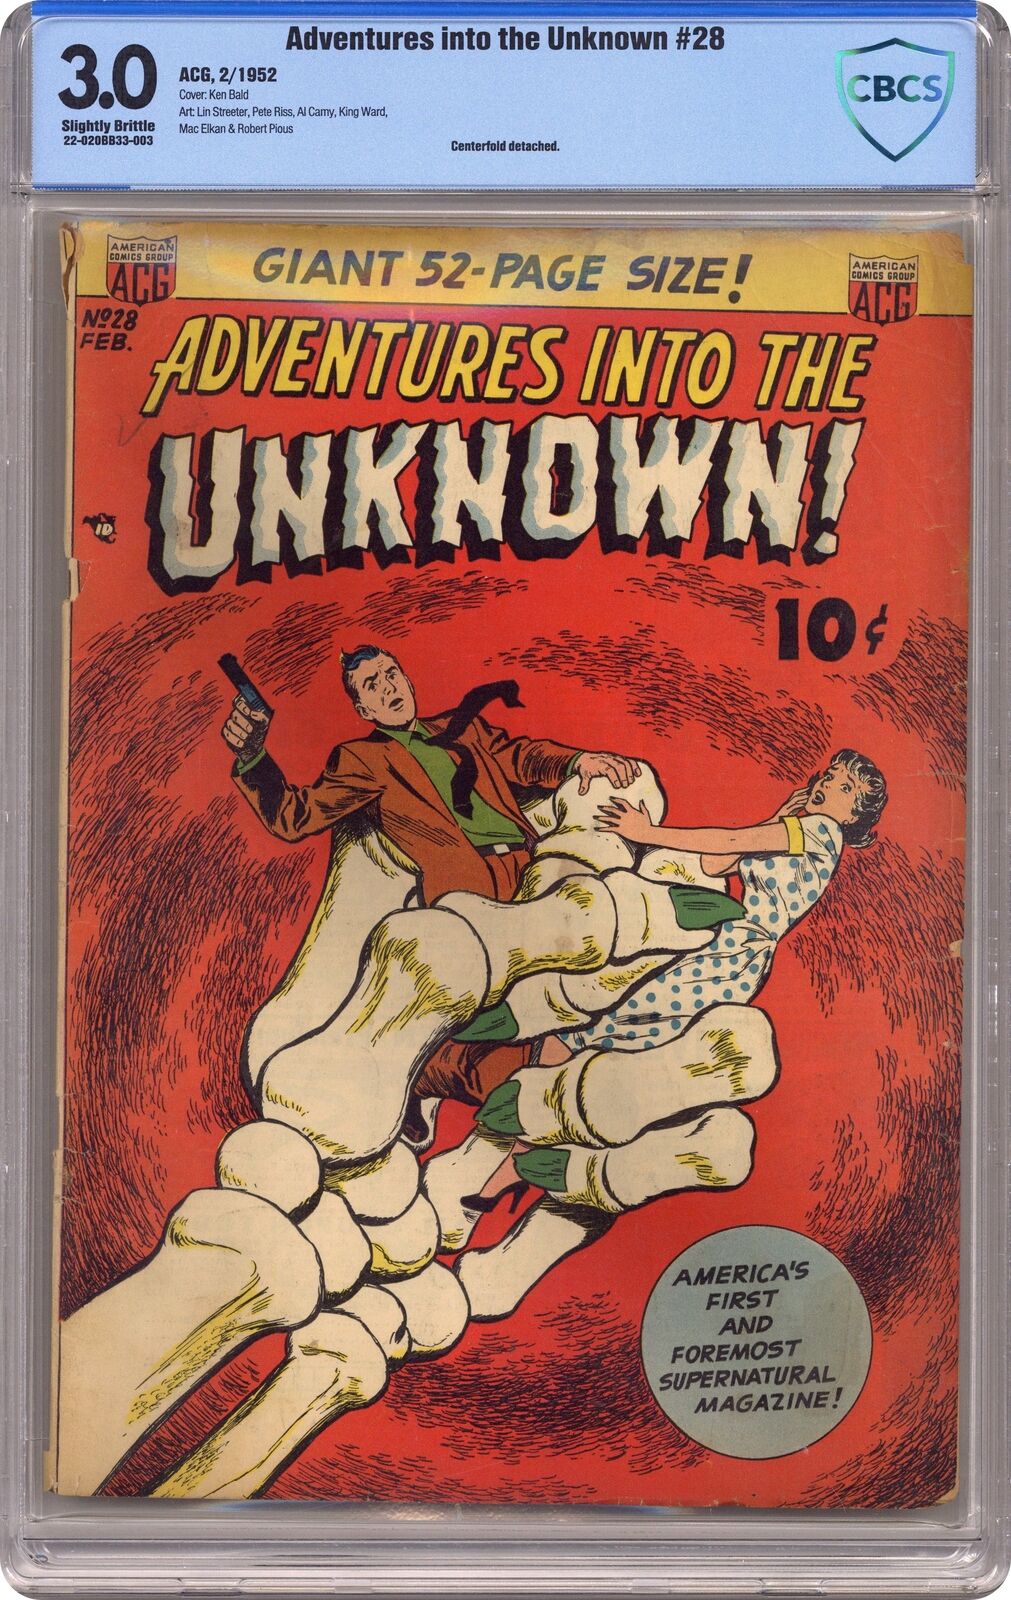 Adventures into the Unknown #28 CBCS 3.0 1952 22-020BB33-003